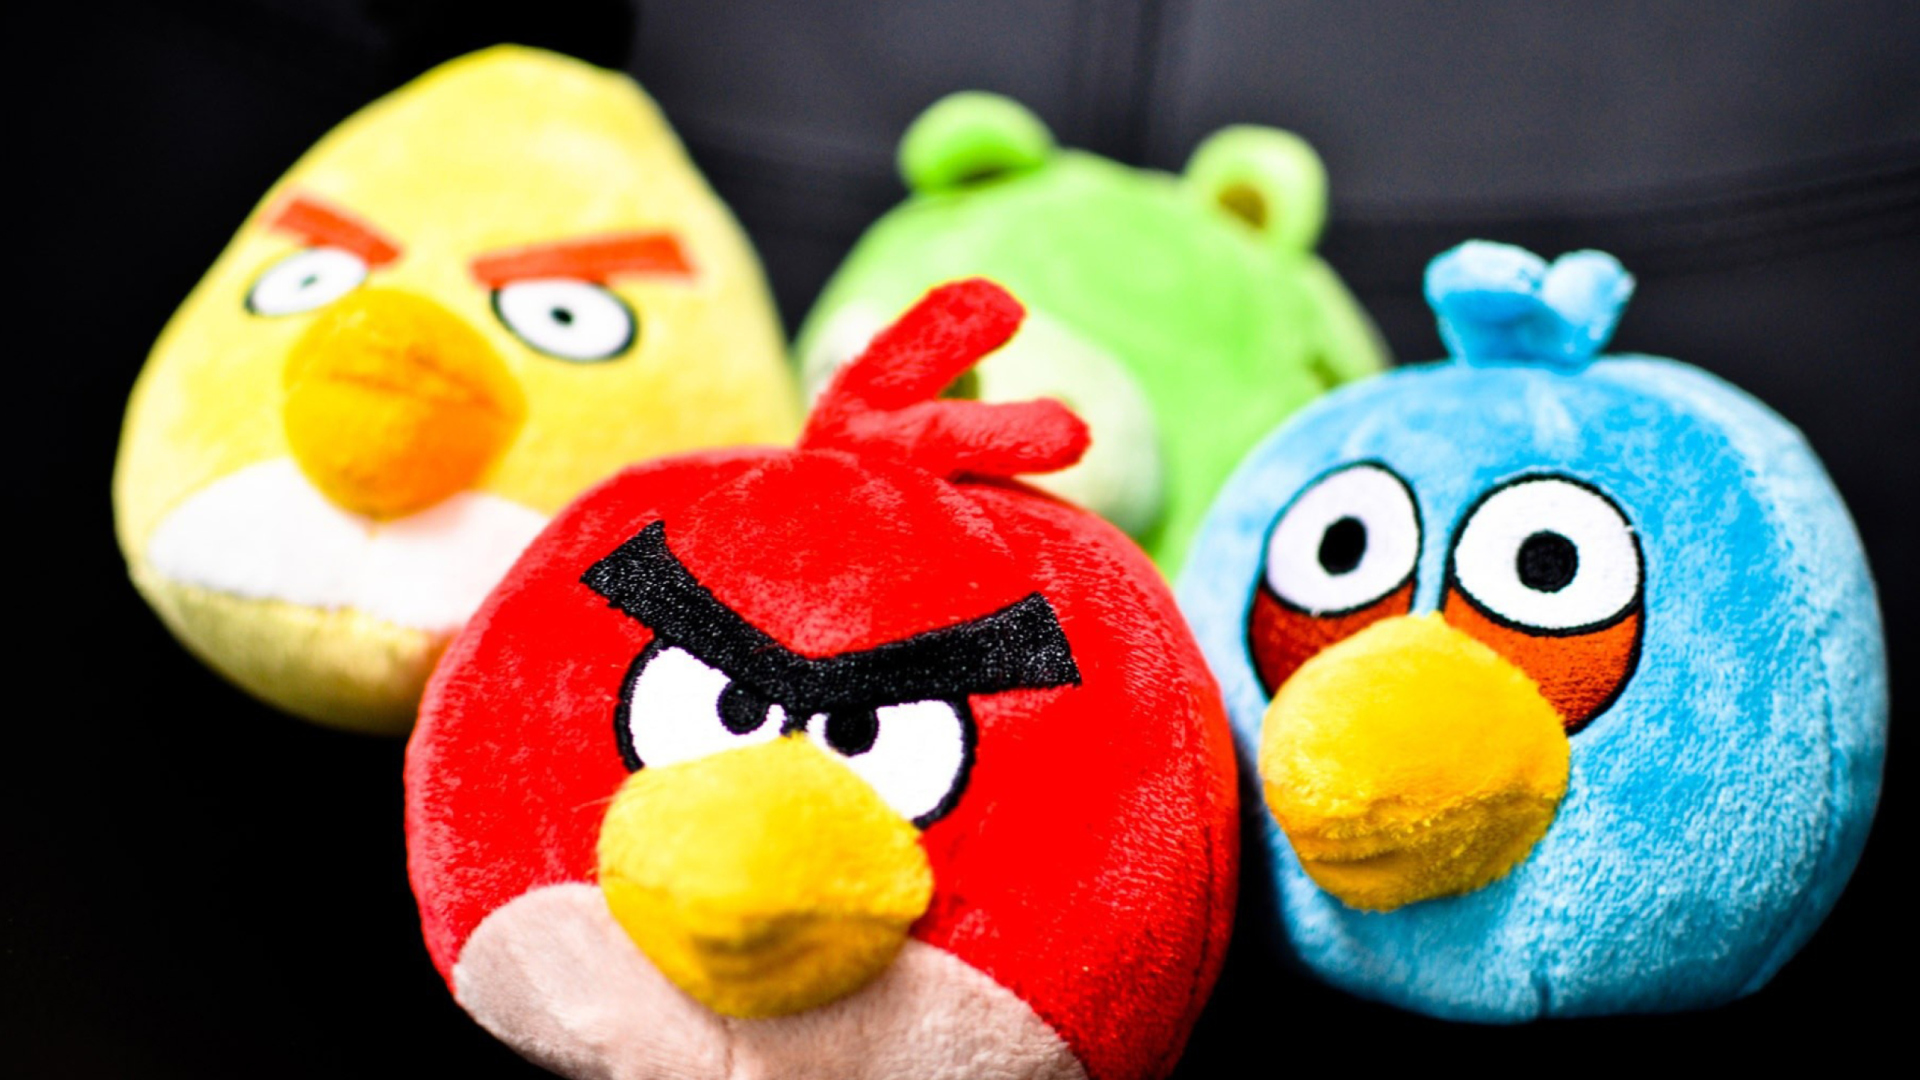 Angry Birds Toy wallpaper 1920x1080